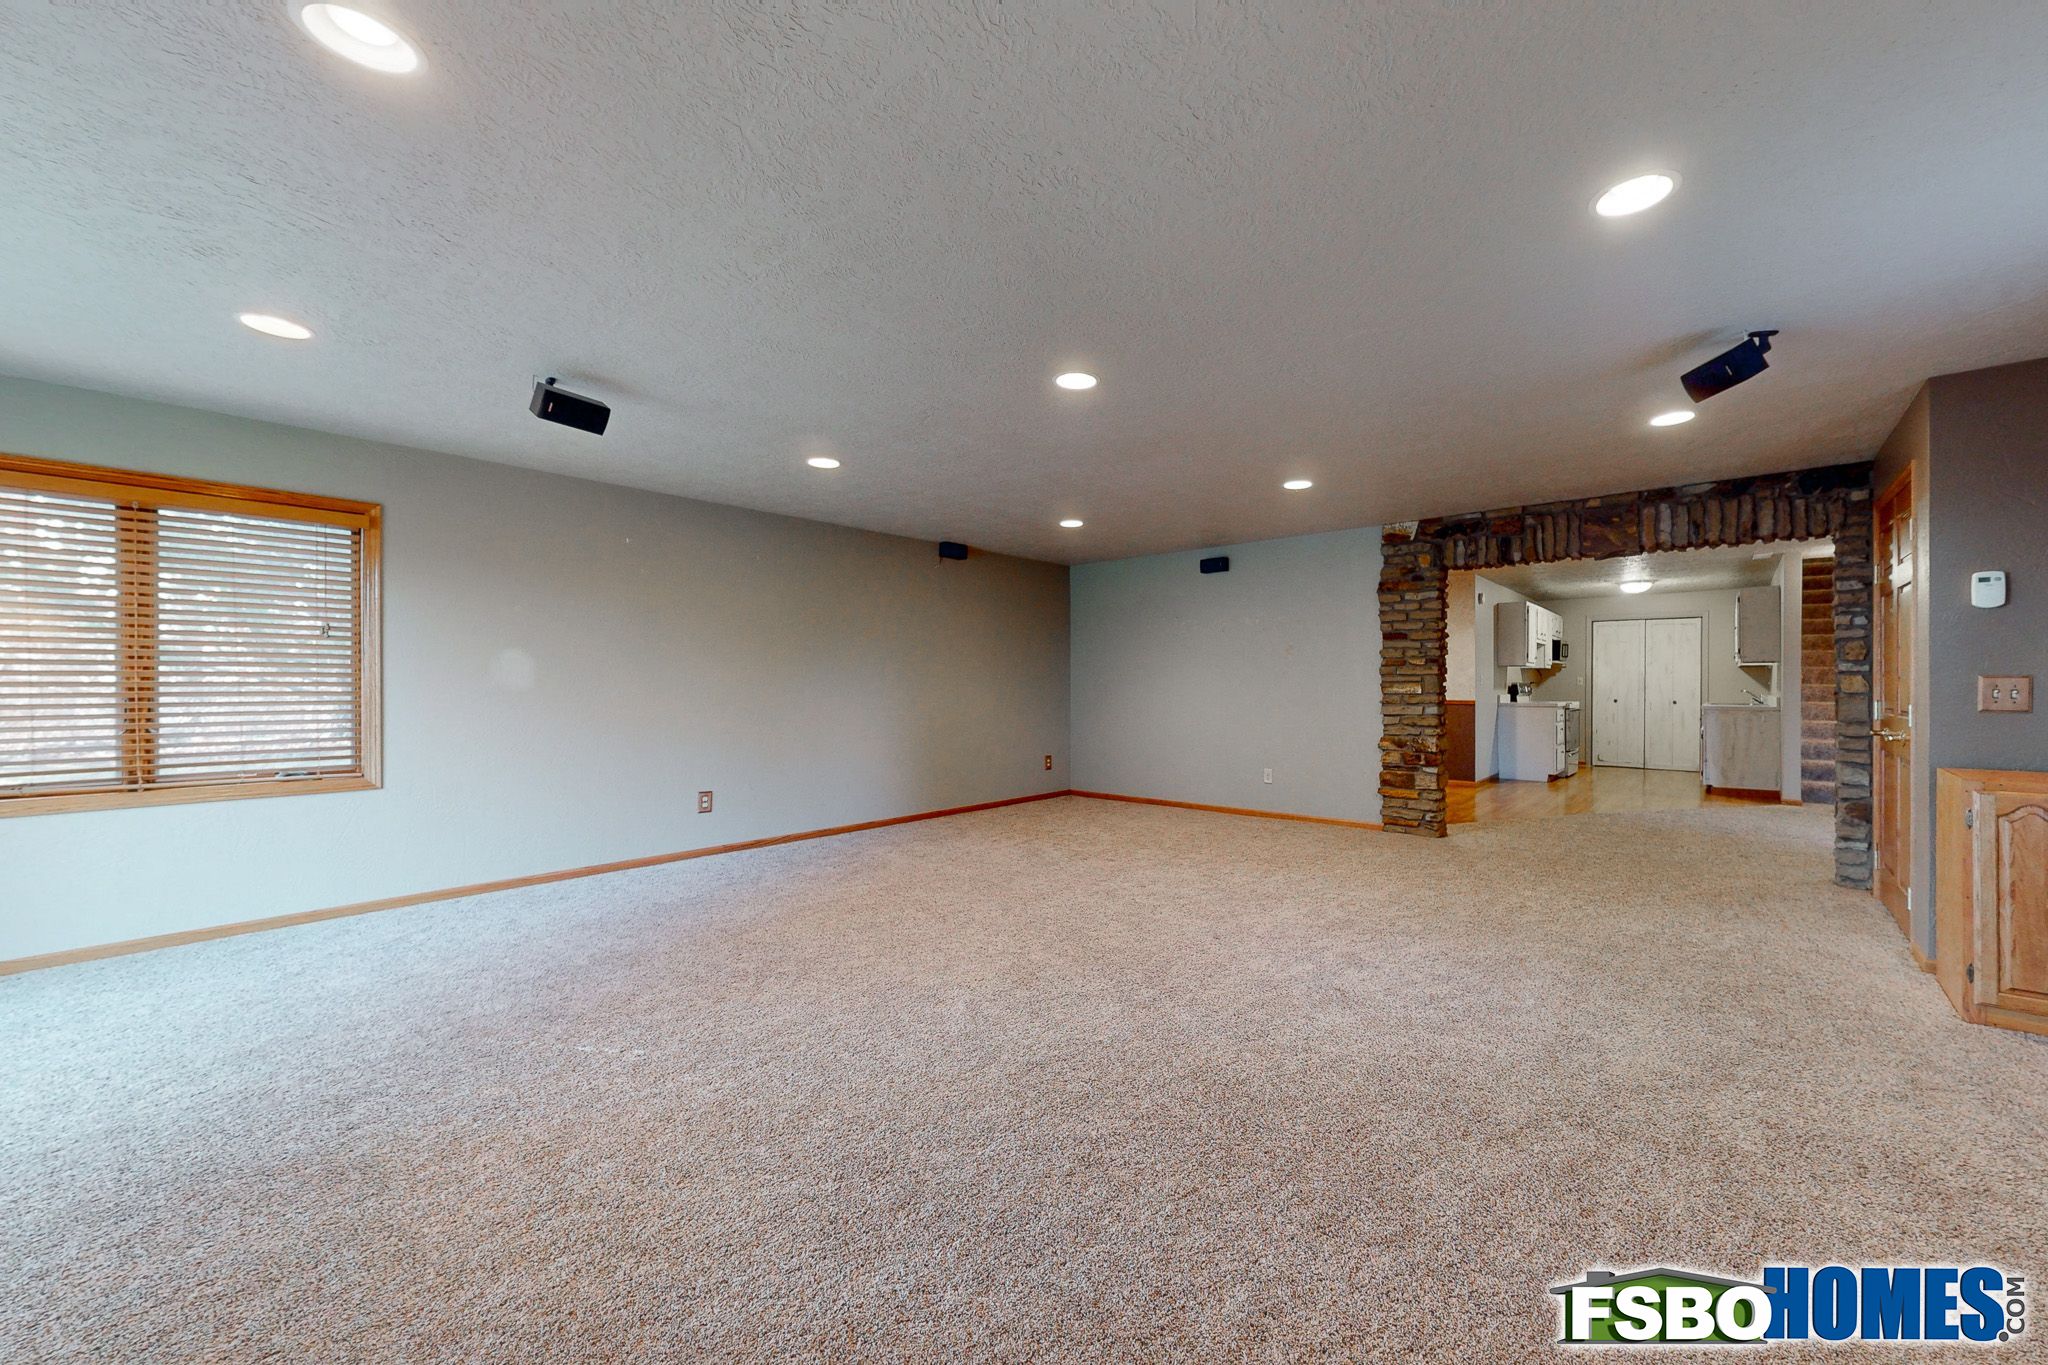 47216 256th St, Renner, SD, Image 21